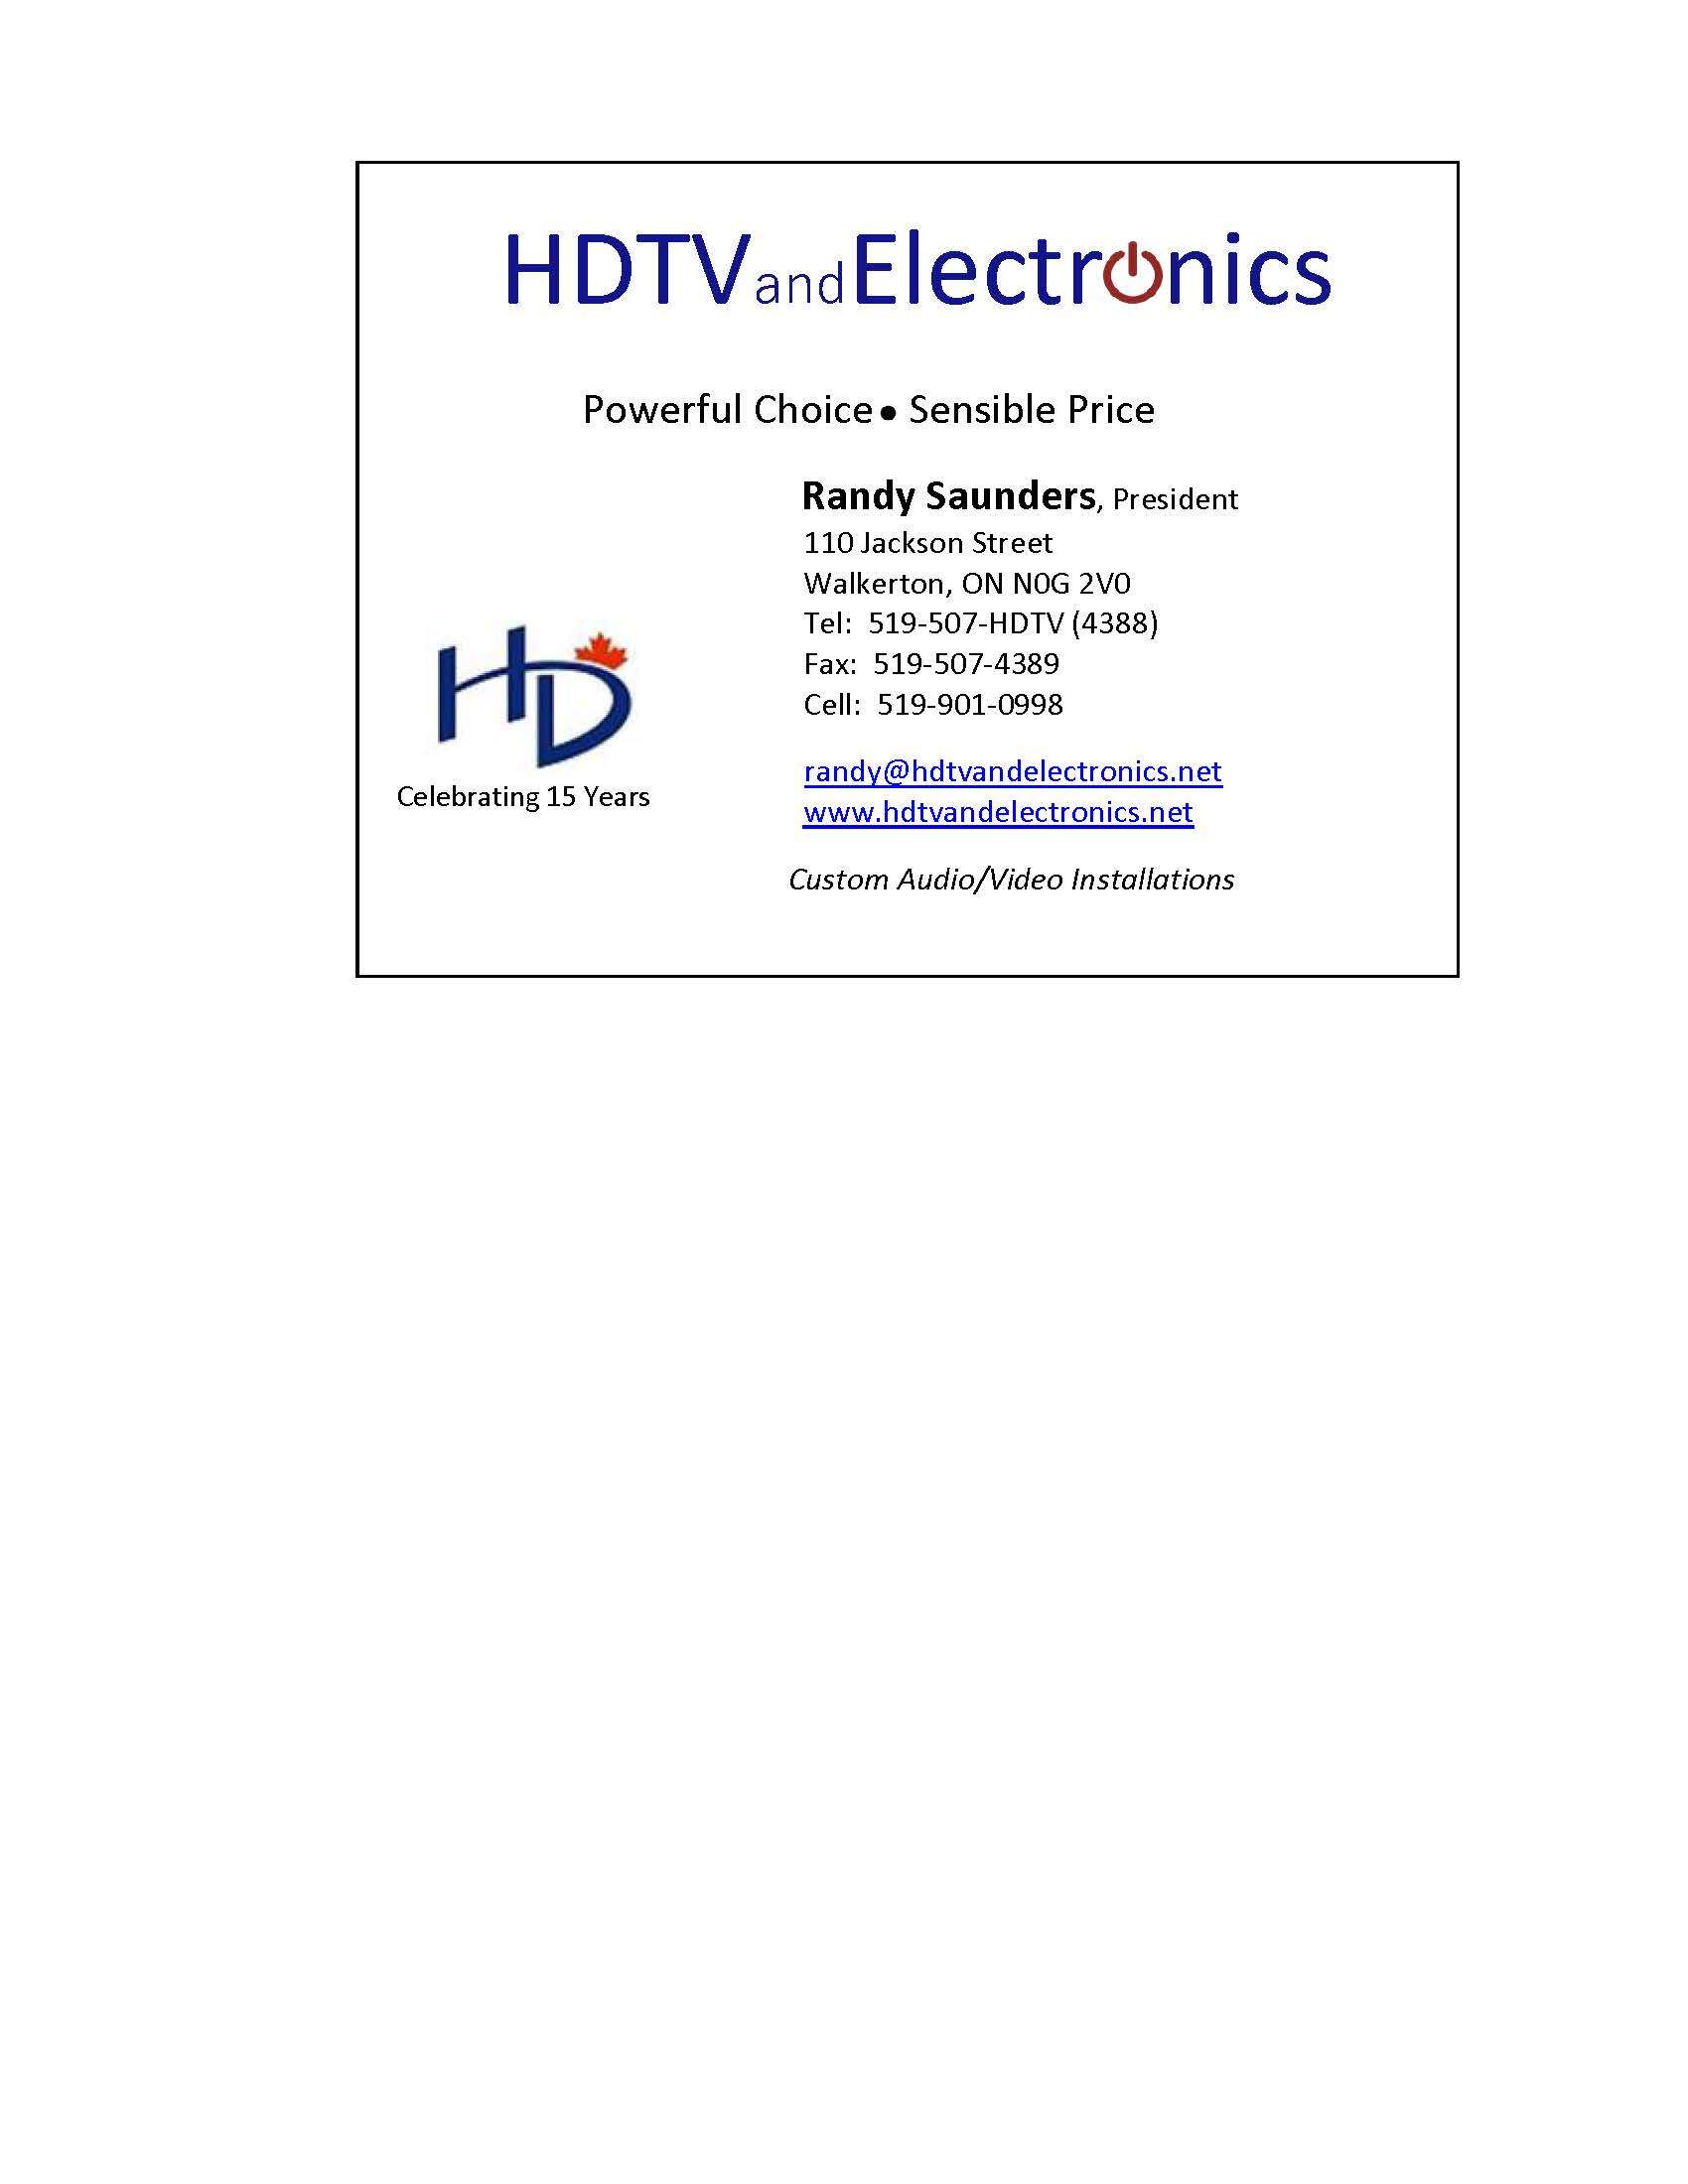 HDTV and Electronics